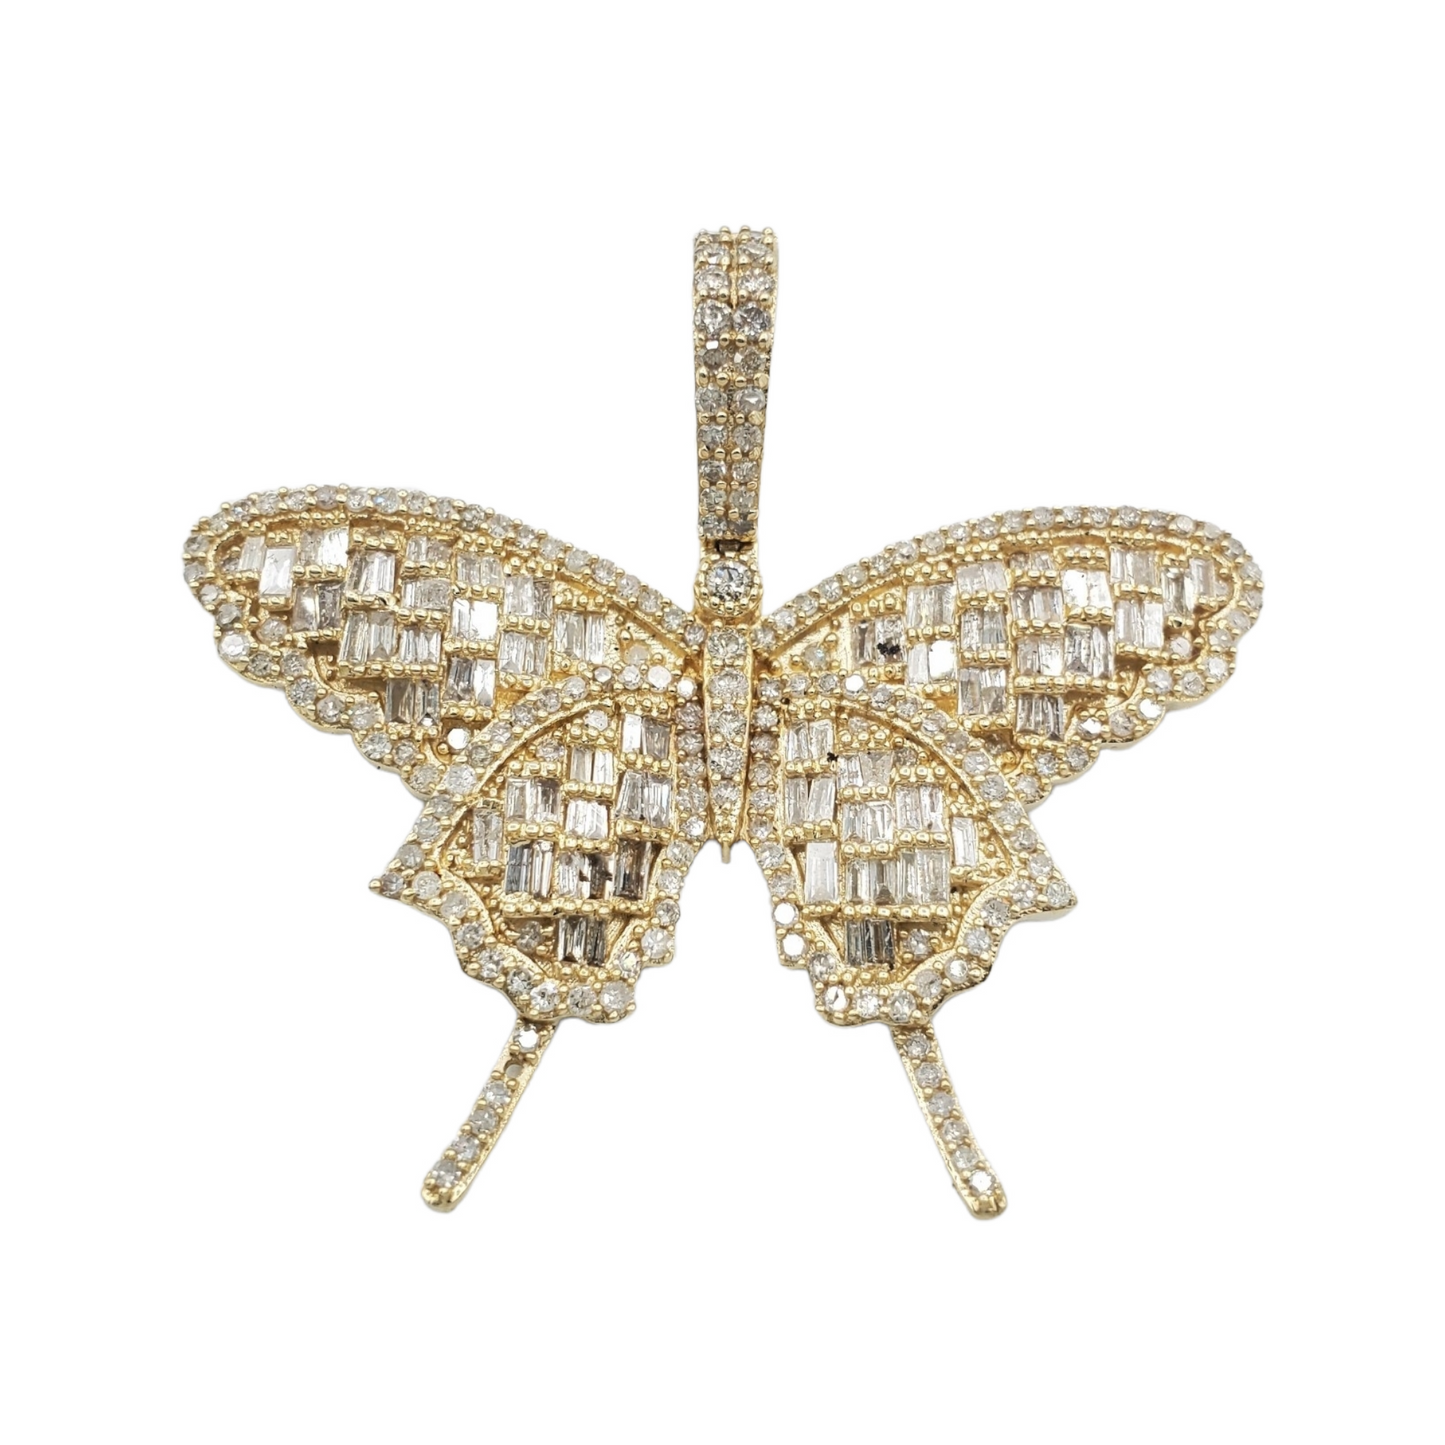 14k Baguette Diamond Butterfly With 1.98 Carats Of Diamonds #23598